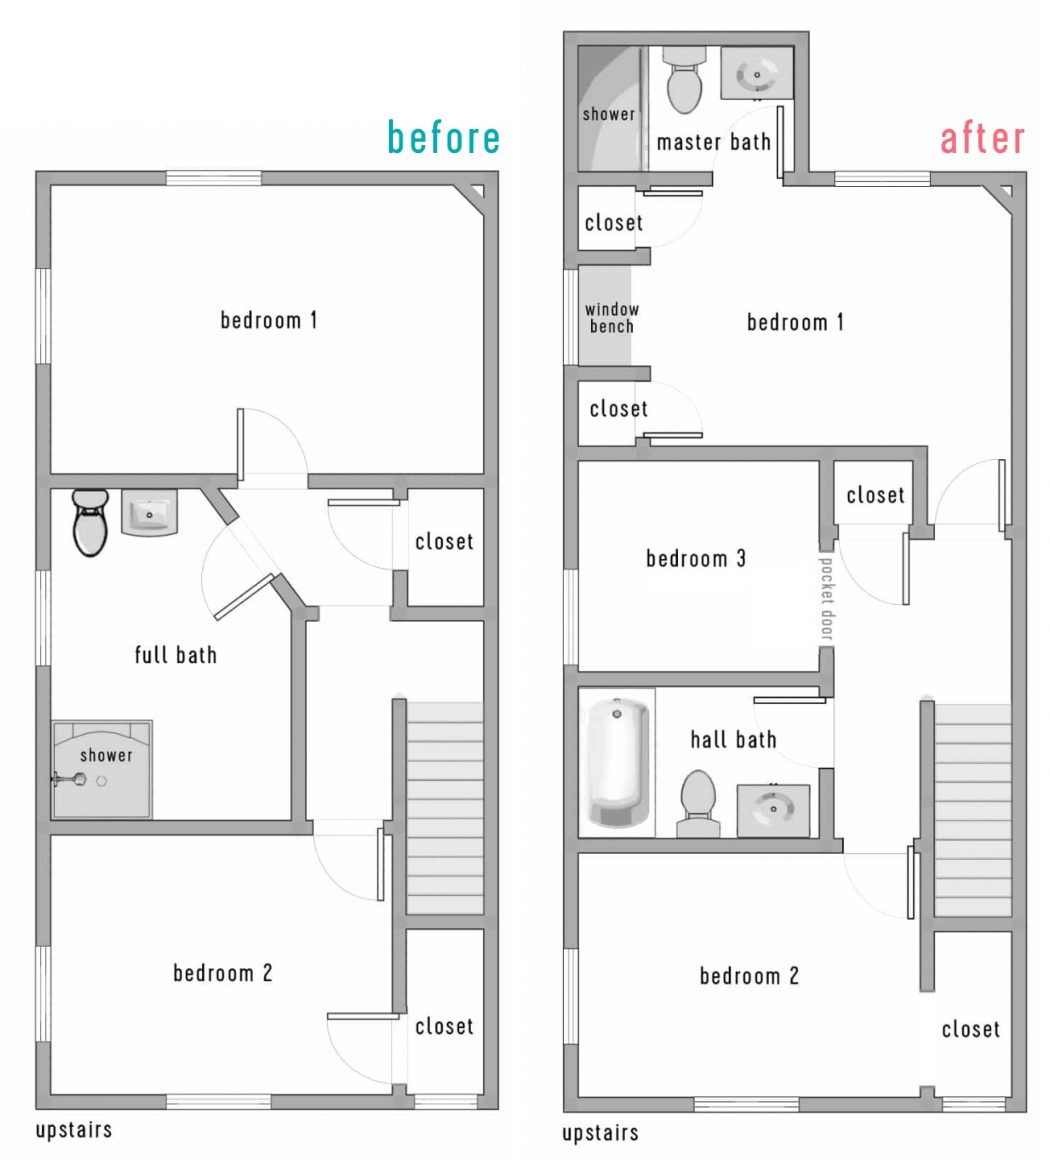 Four More Finished Spaces At The Duplex! | Young House Love